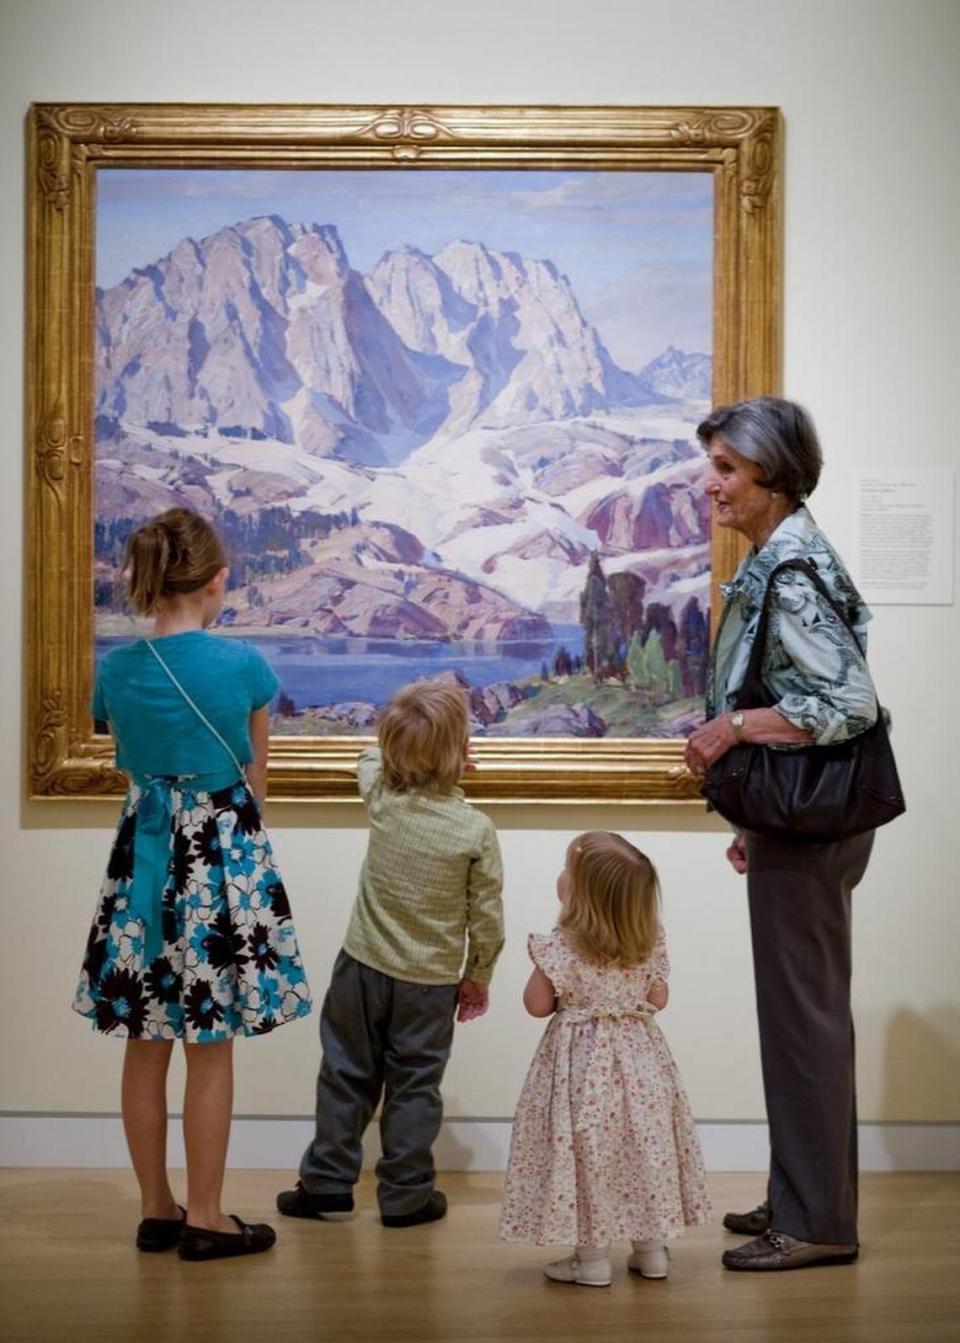 The Crocker Art Museum can help families introduce art to children. In 2010 Melza Barr talked with three of her grandchildren about the mountains and lake in “The High Sierras” by Paul Lauritz.